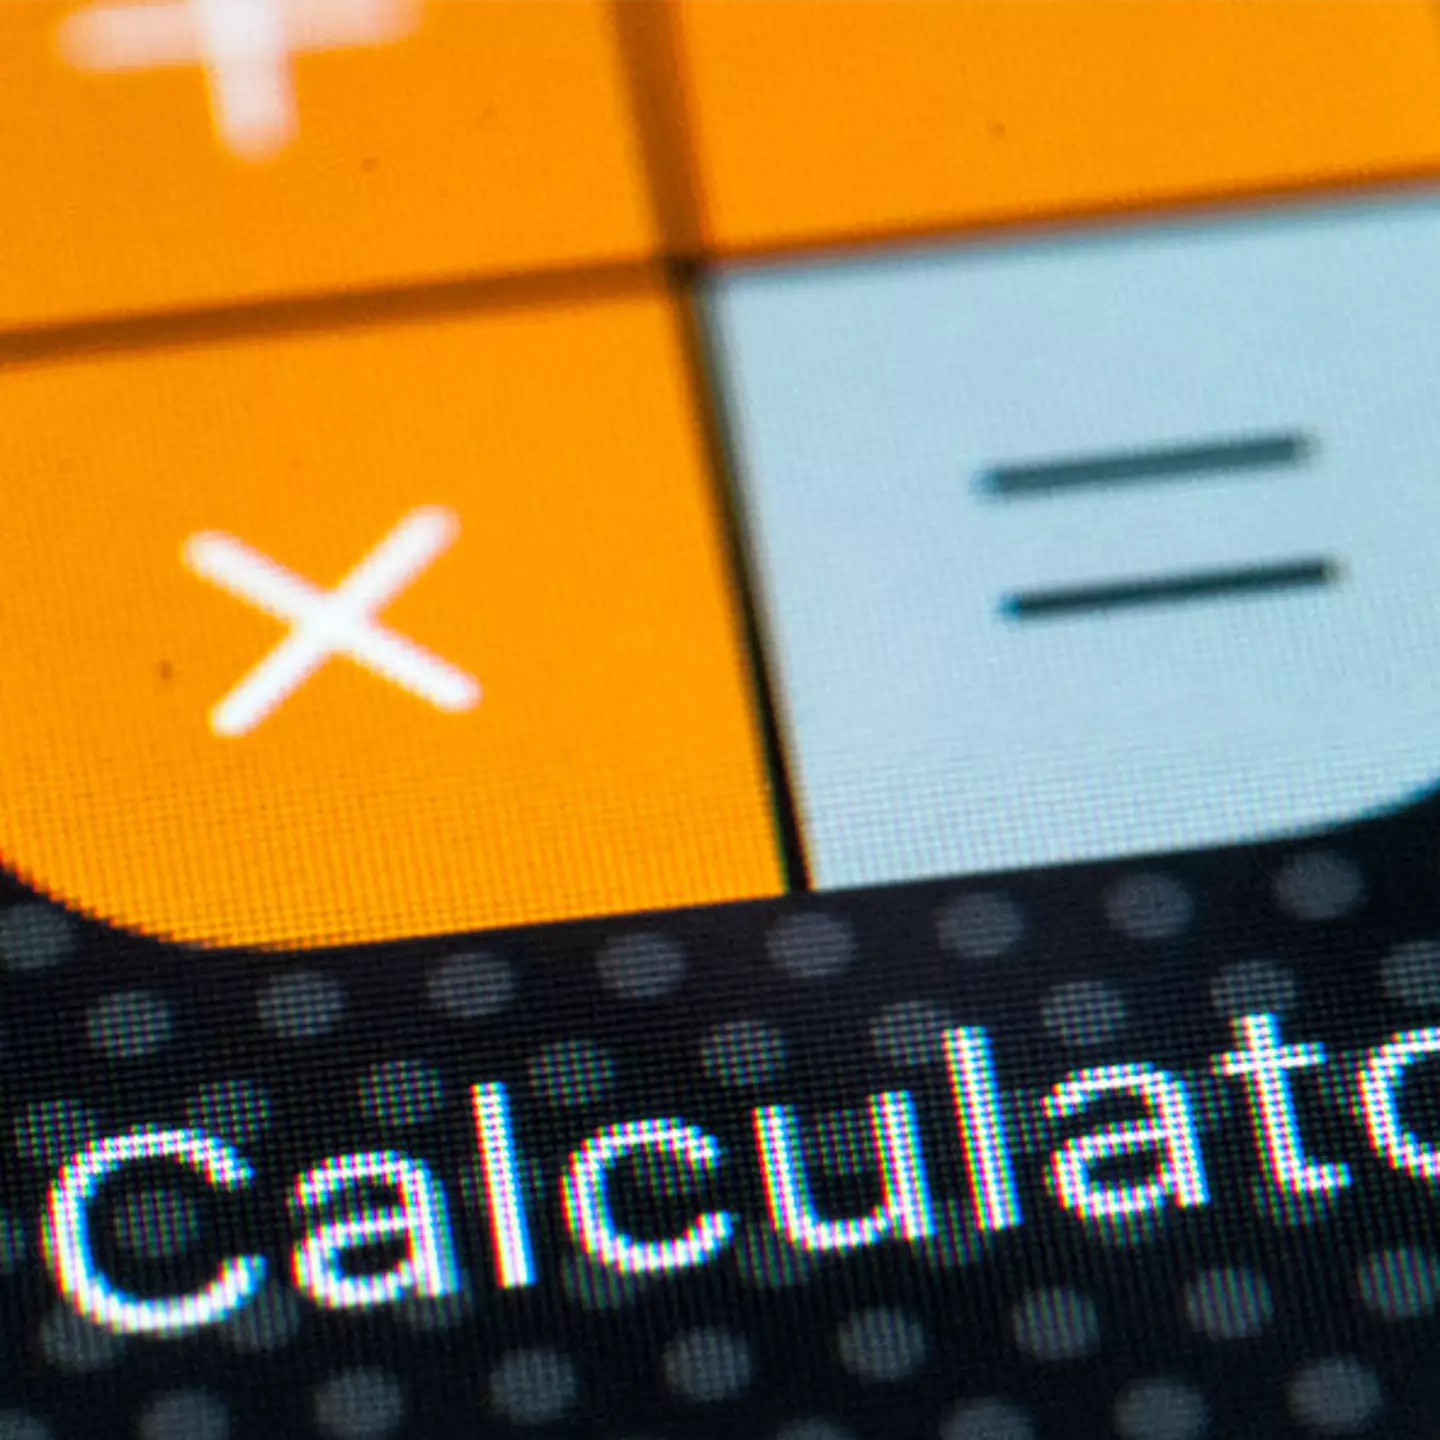 People realise they’ve been using the iPhone calculator app wrong